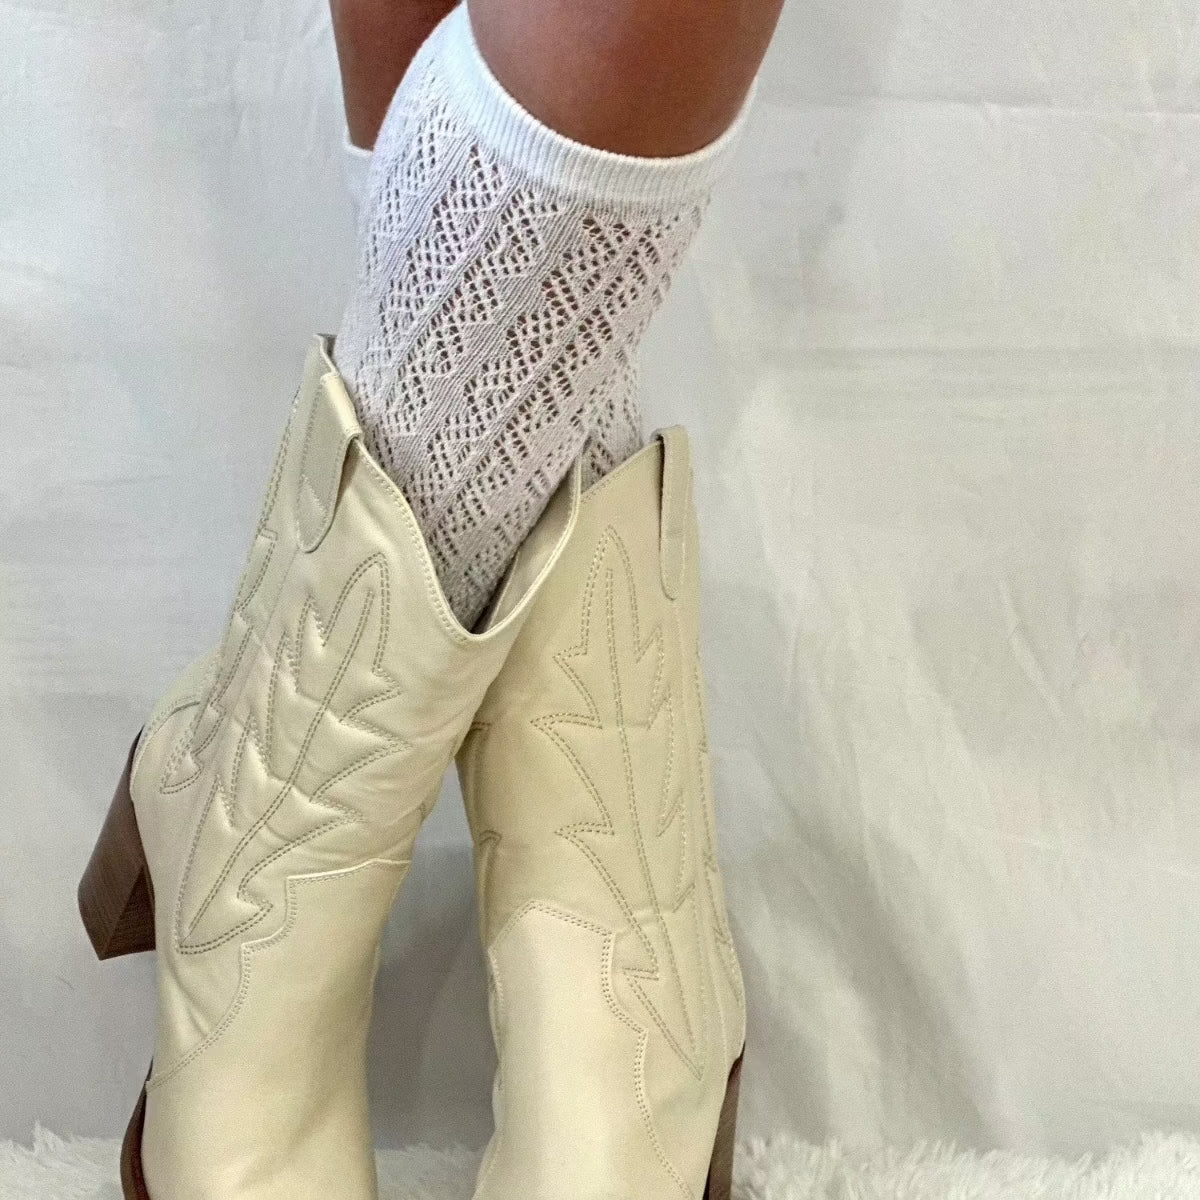 lacy socks for cowboy boots. women, socks to wear with cowboy western boots, tall knee high boot socks women's.